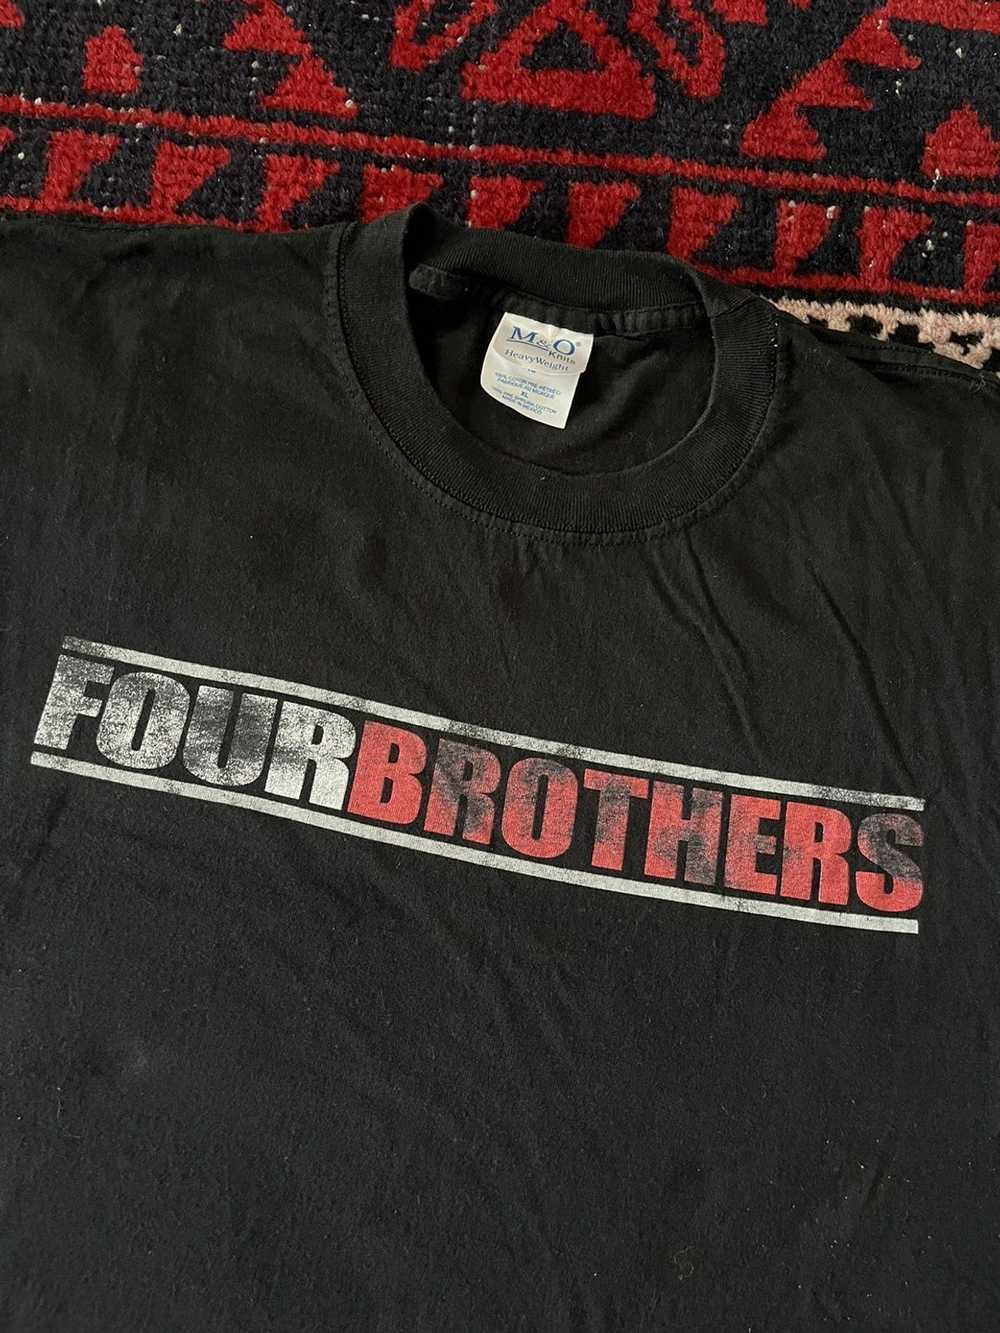 Movie × Other × Vintage 2005 'Four Brothers' Movi… - image 2